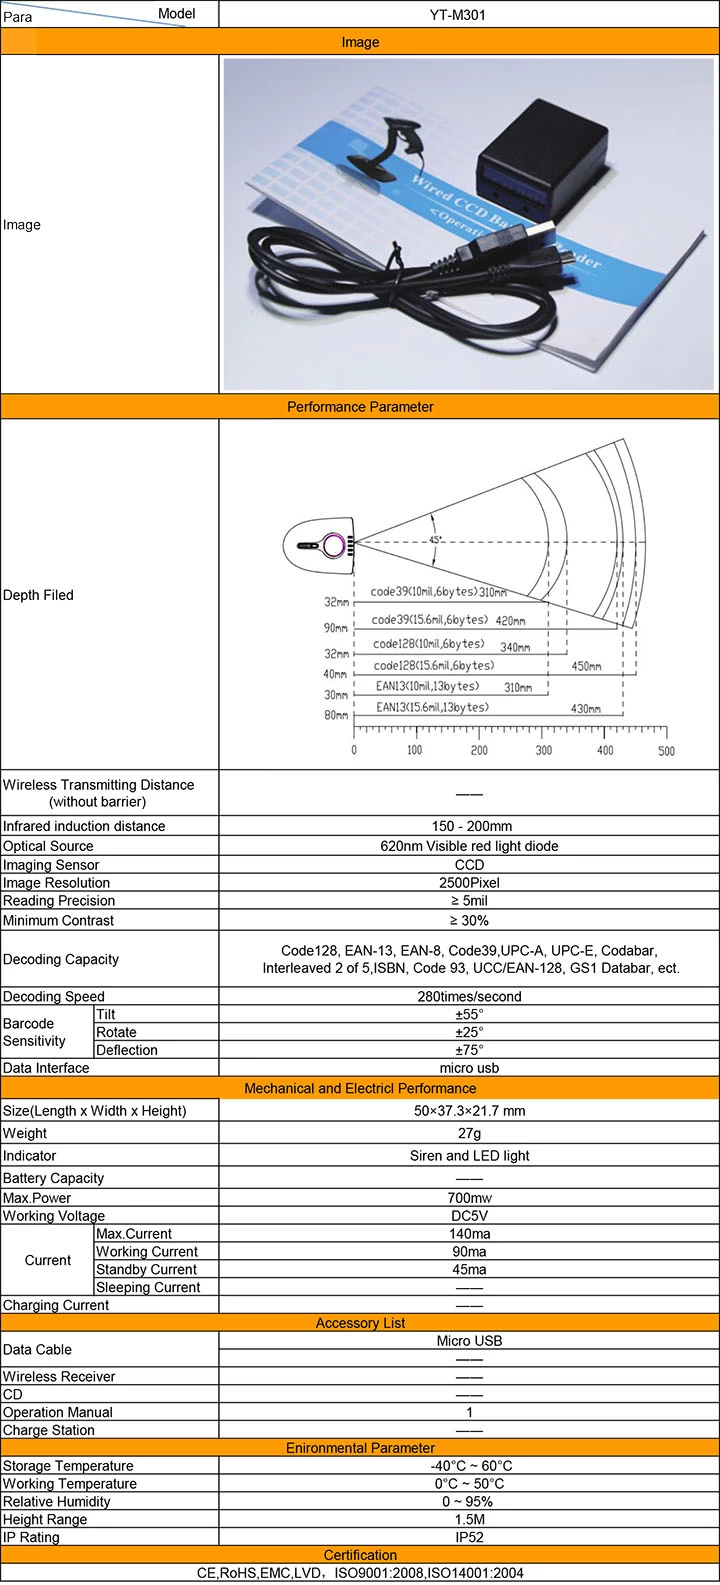 specification about YT-M301